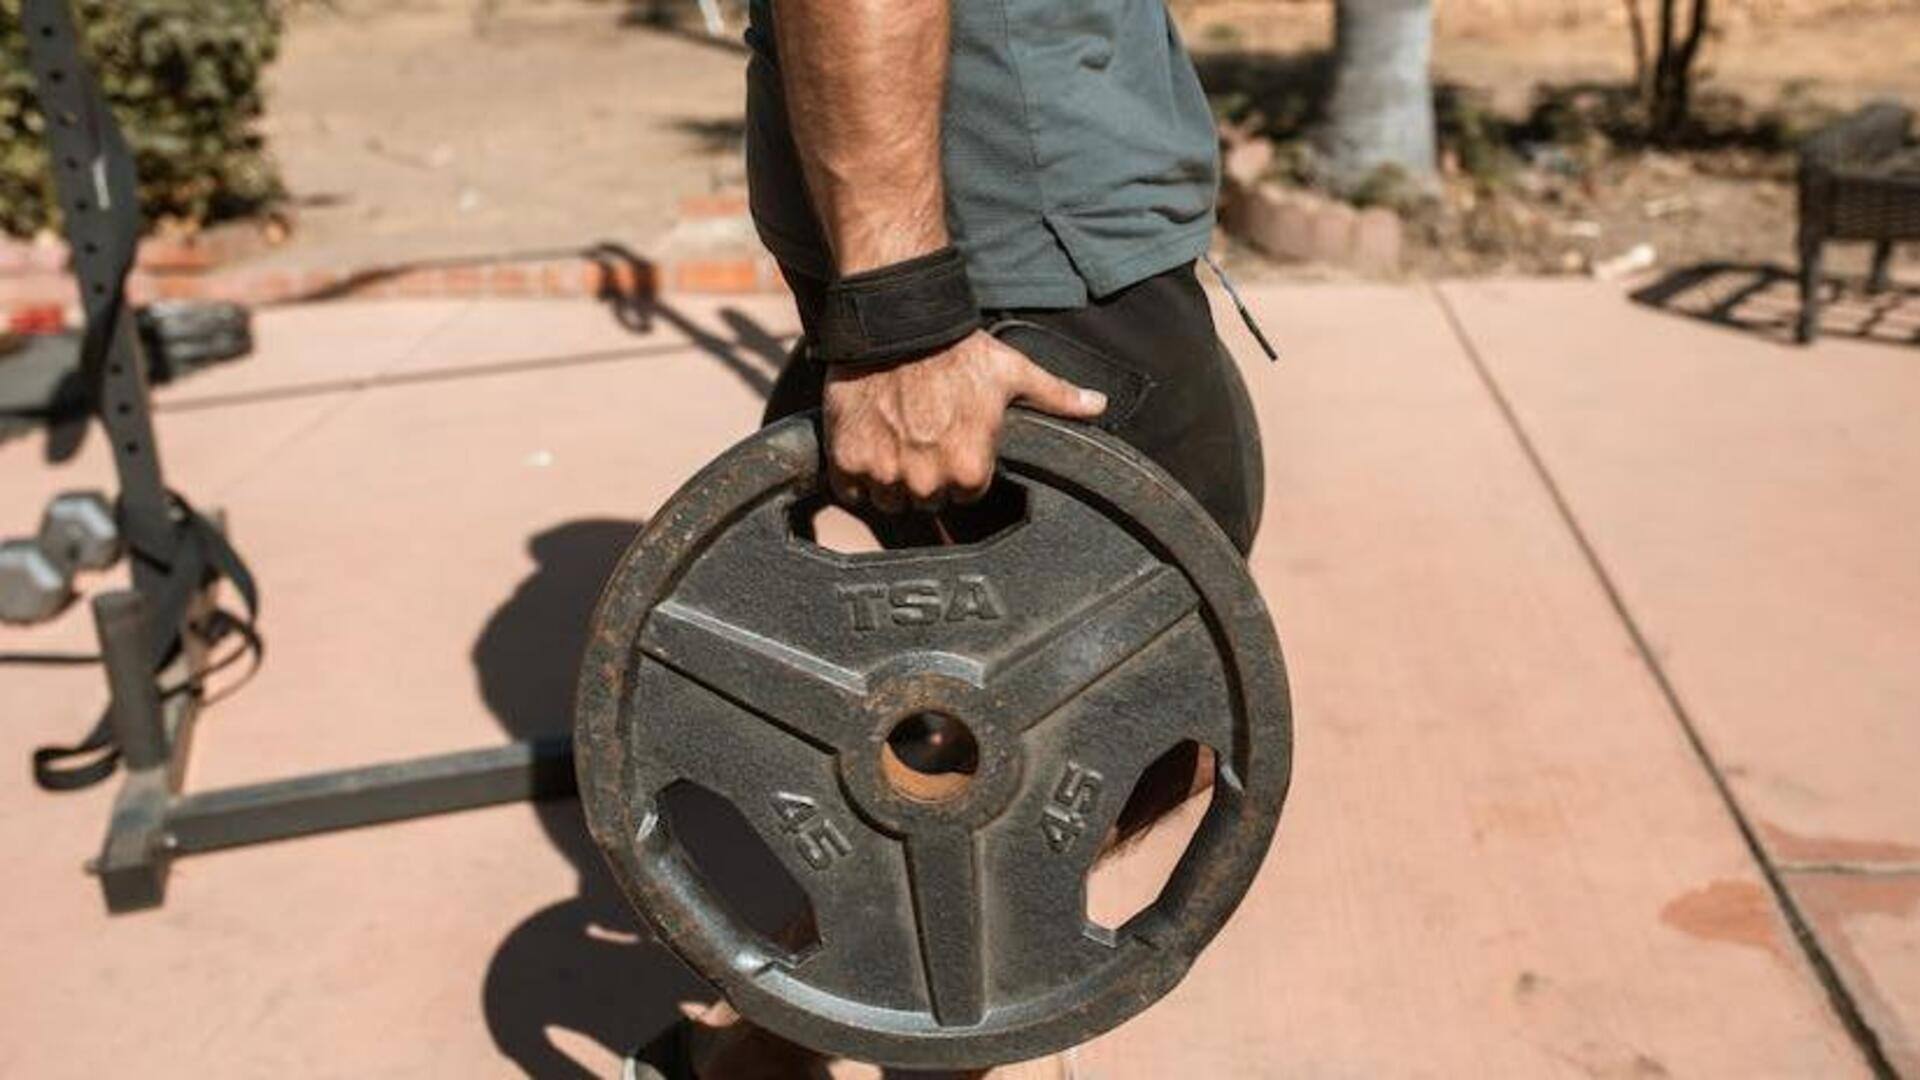 Build muscle strength with these weight plate exercises